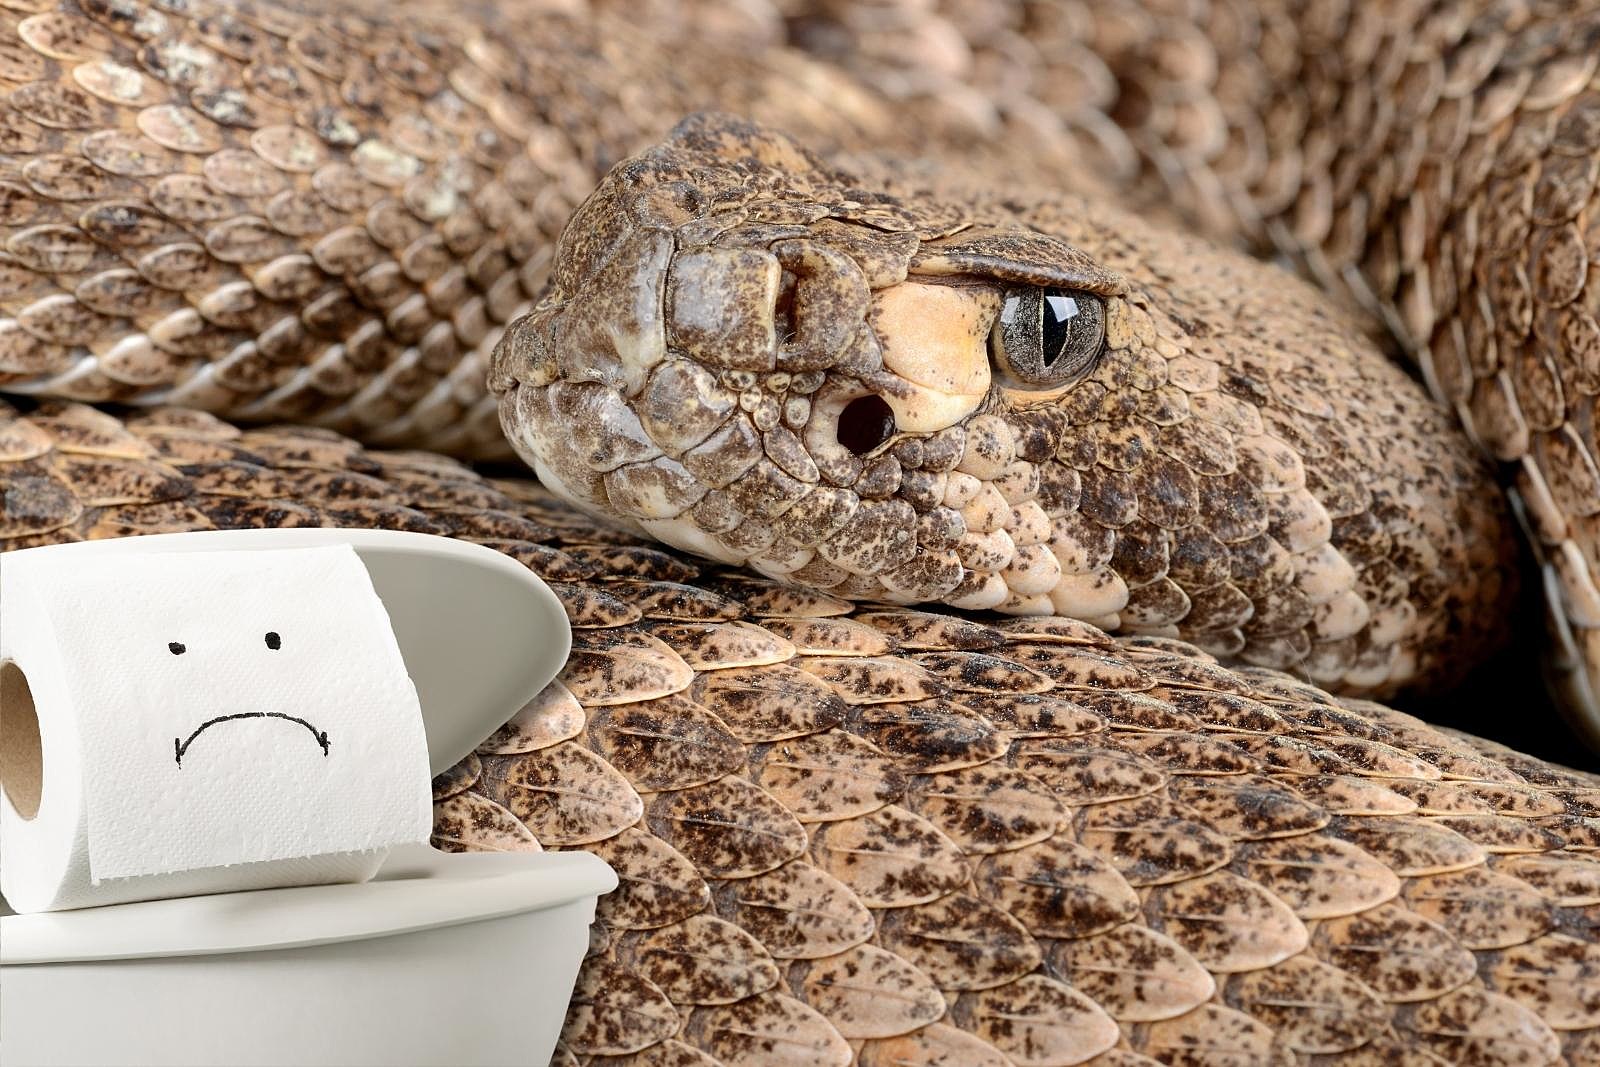 Can Snakes Really Come Up a Toilet Pipe?